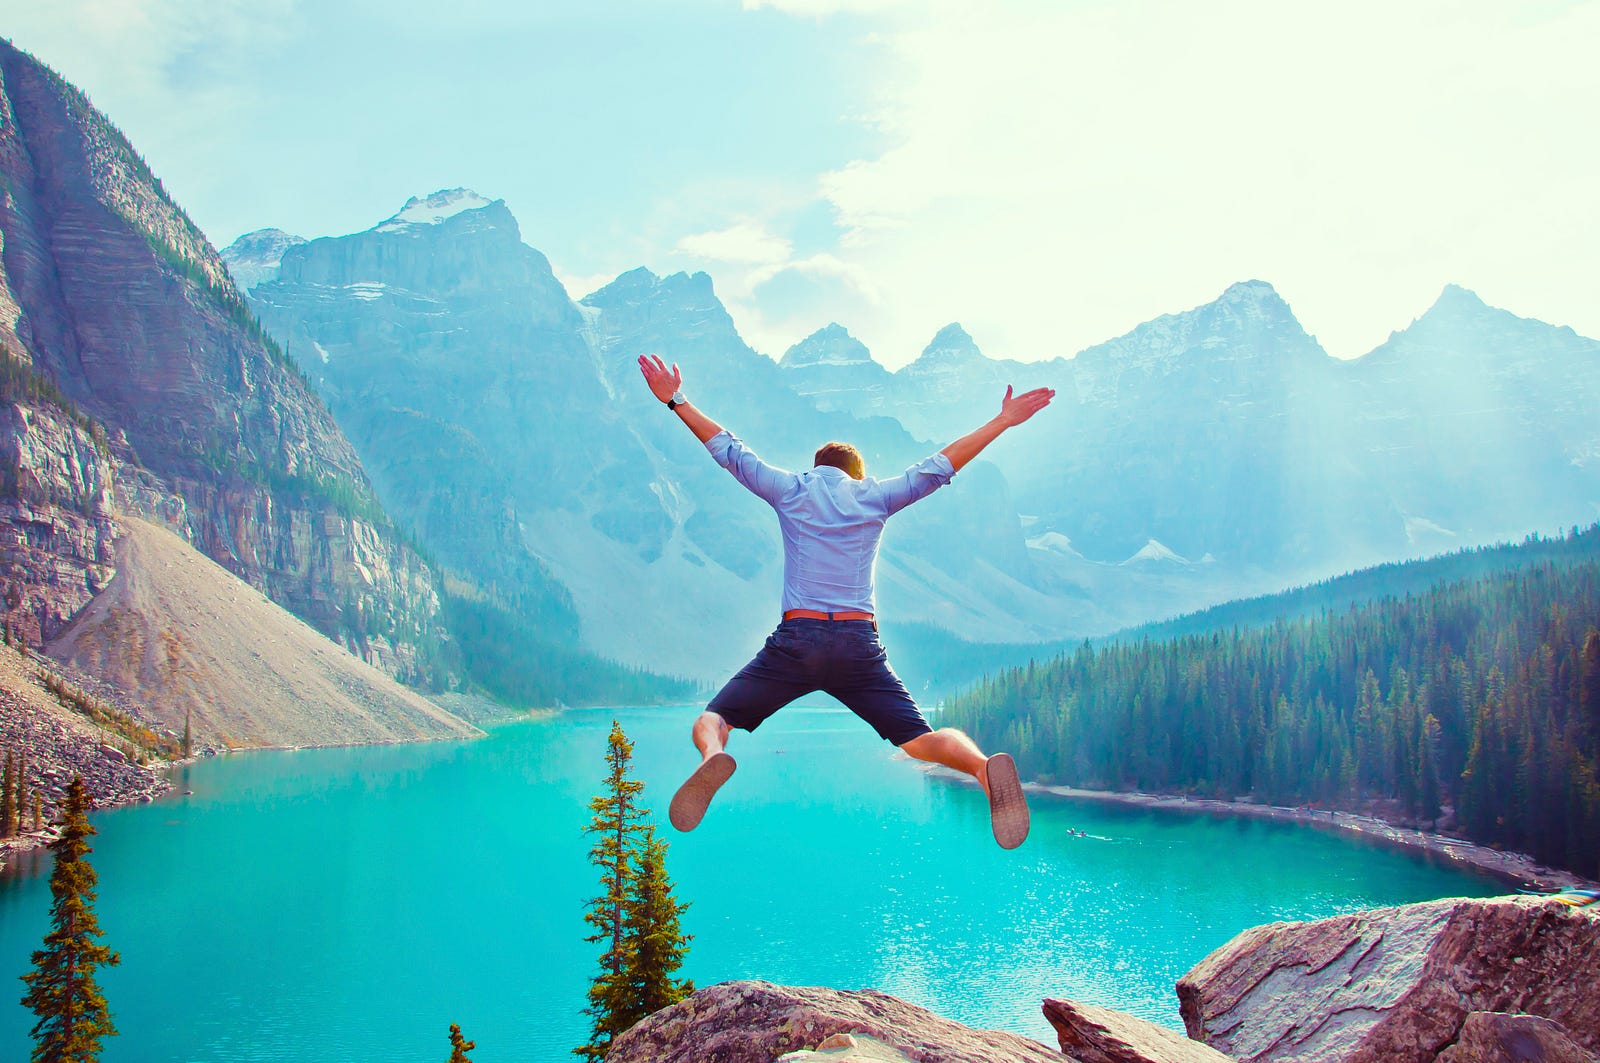 a man in blue shirt and shorts jumping against a background of lake and mountains